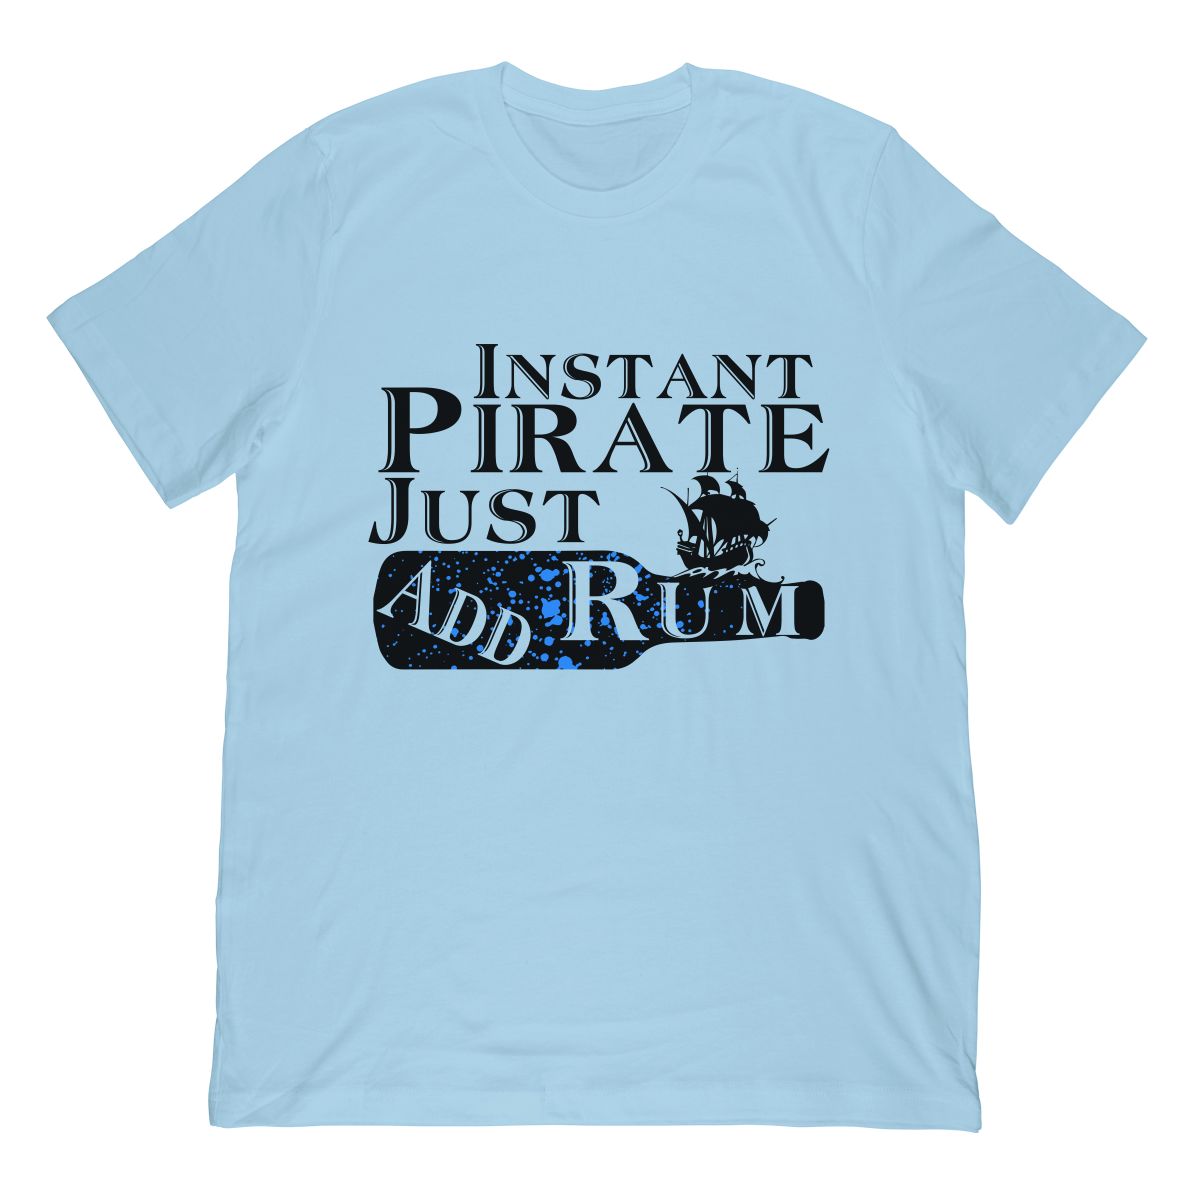 Instant Pirate Just Add Rum Funny Cruise Ship T-Shirt